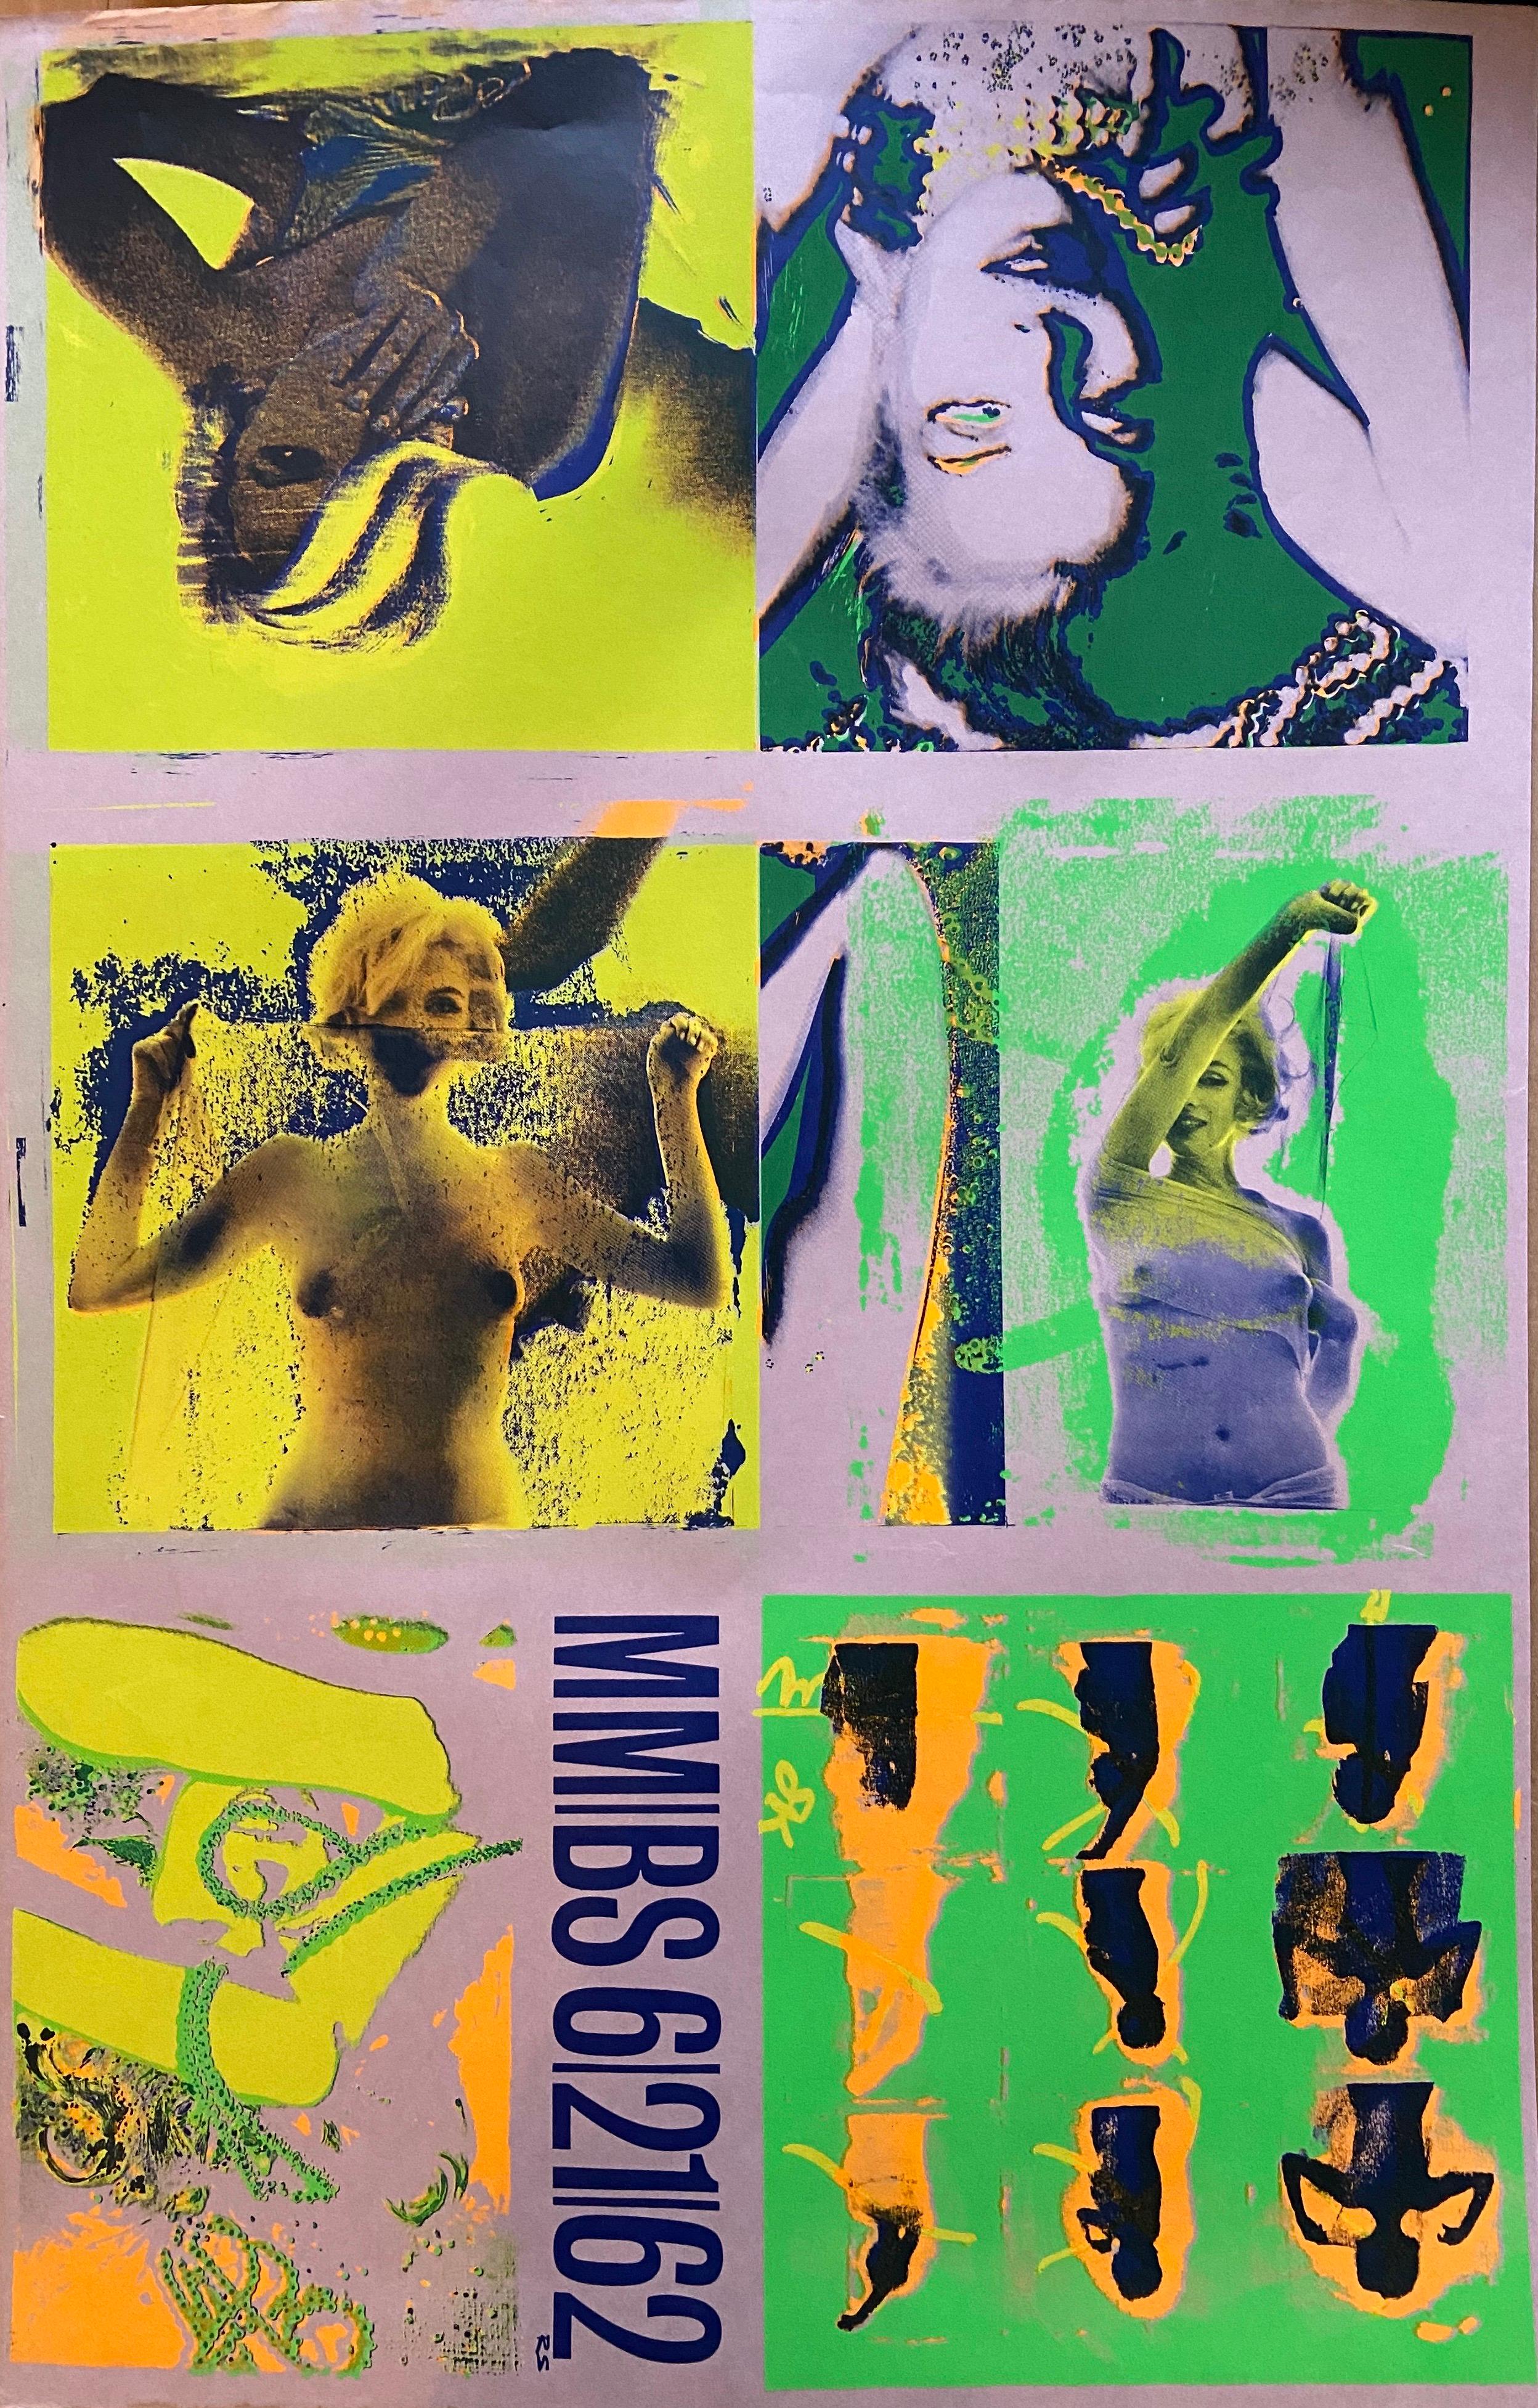 Bert Stern - Silkscreen The last session - YELLOW  
Large screen print in a single run which was used as a proof for the No2 issue of the US Avant Garde magazine in August 1968. 
Signed BS in the Board 
In perfect condition. 
Never exposed. 
58 x 89